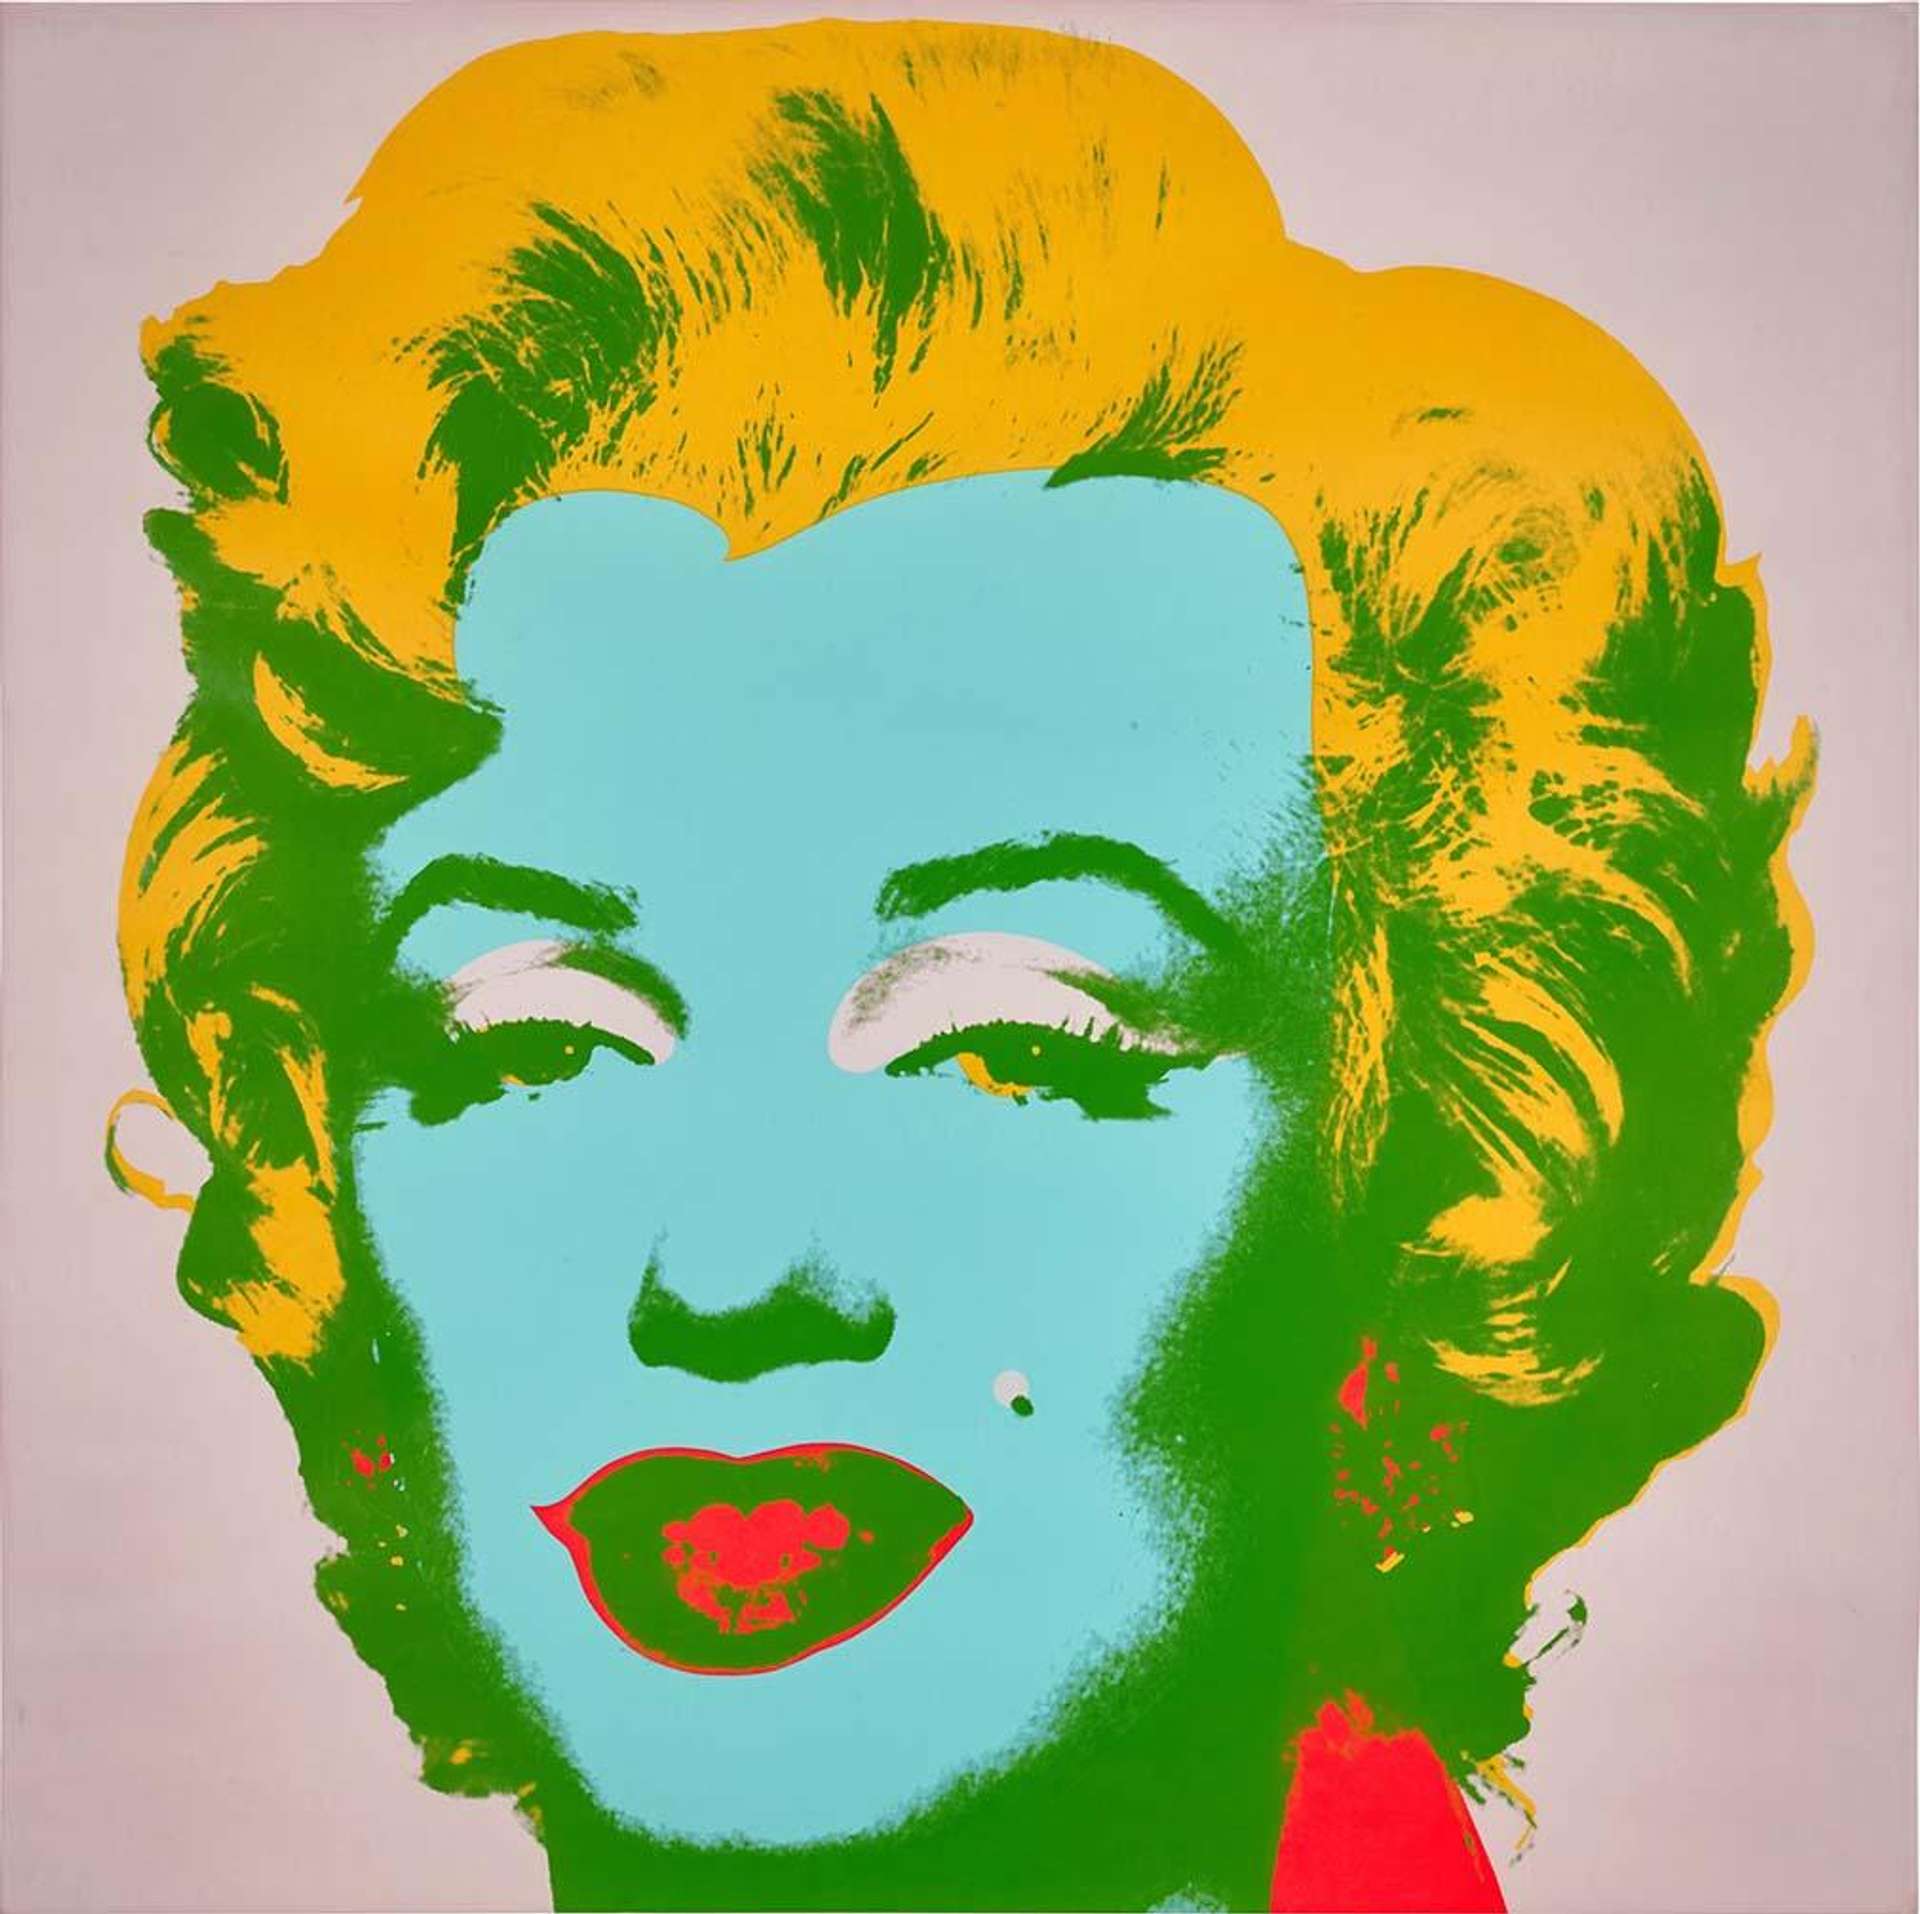 Andy Warhol's 5 Most Famous Artworks, Guide